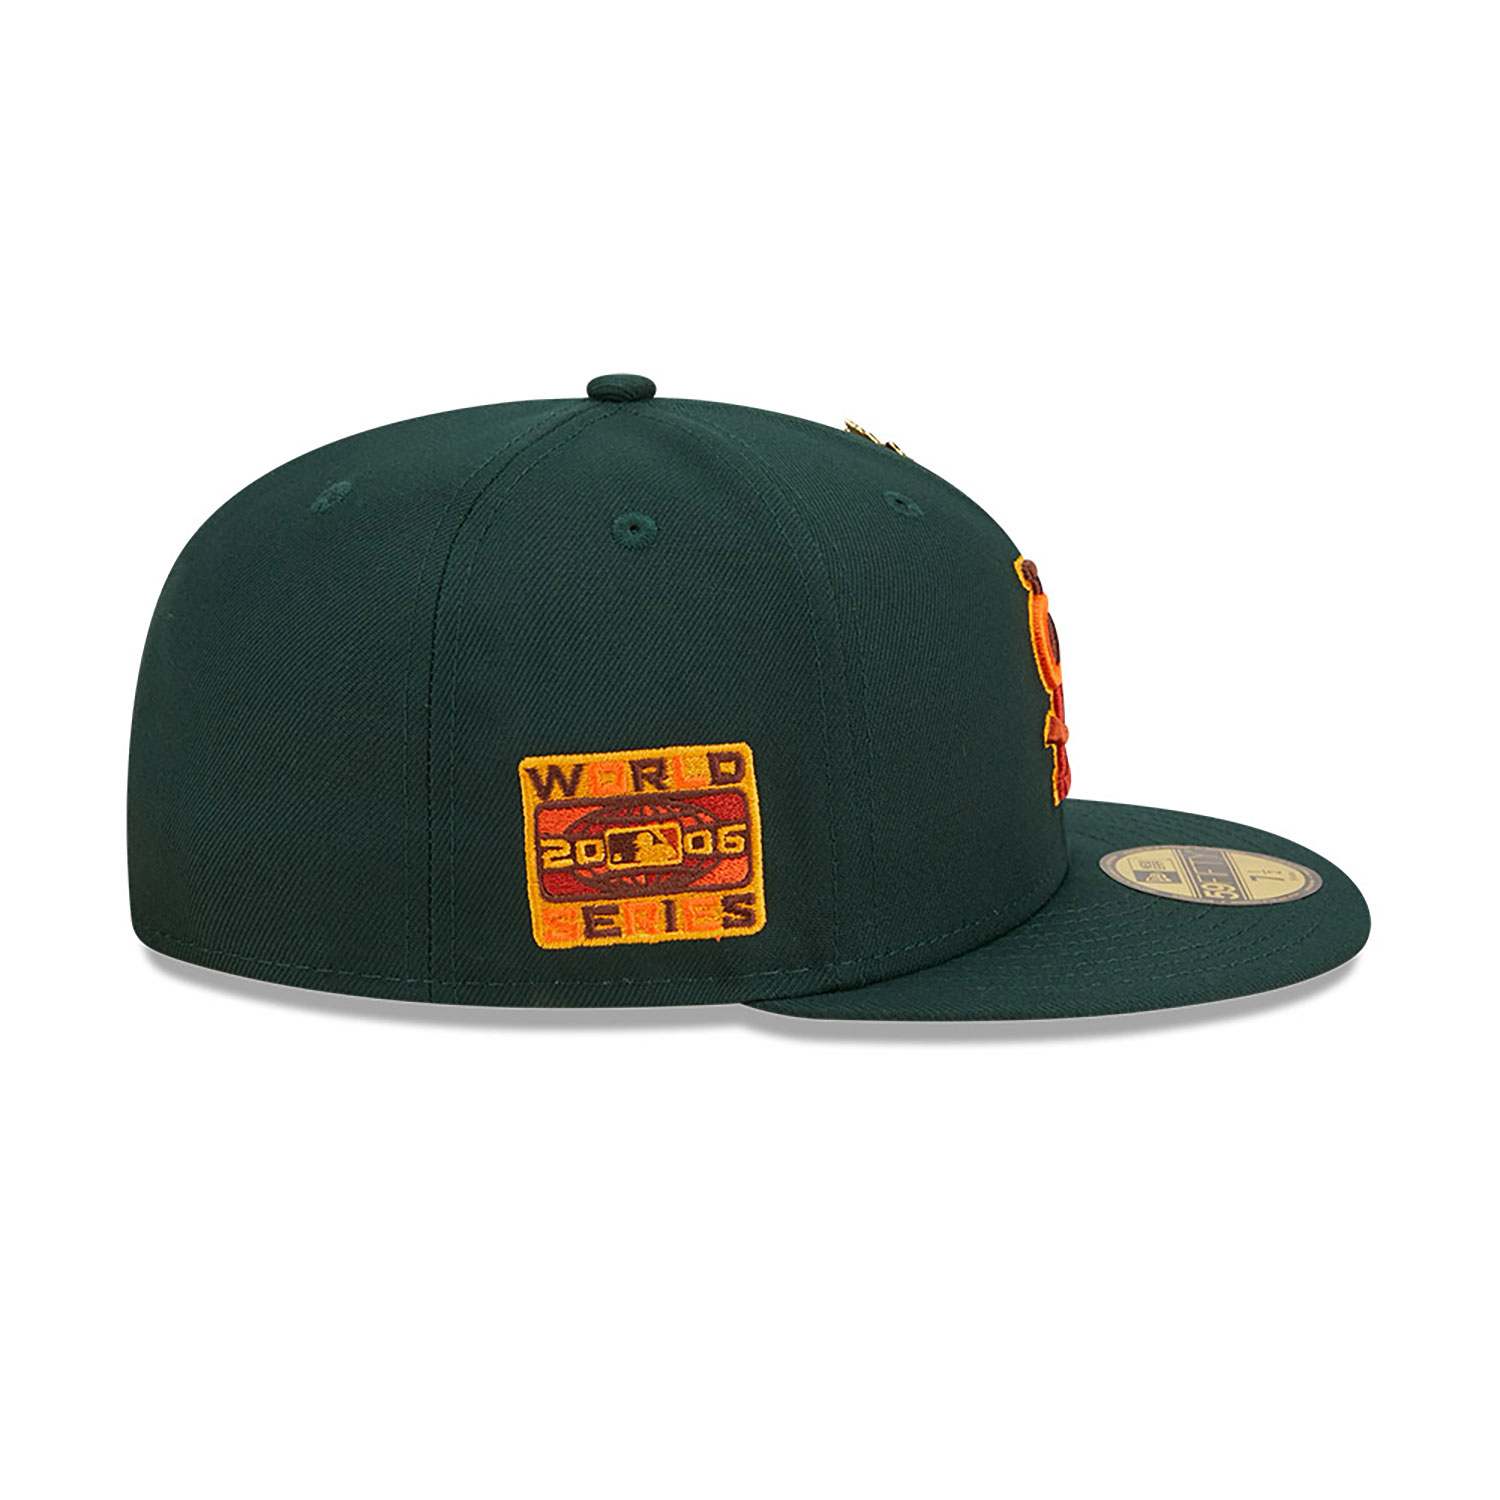 St. Louis Cardinals Leafy Dark Green 59FIFTY Fitted Cap